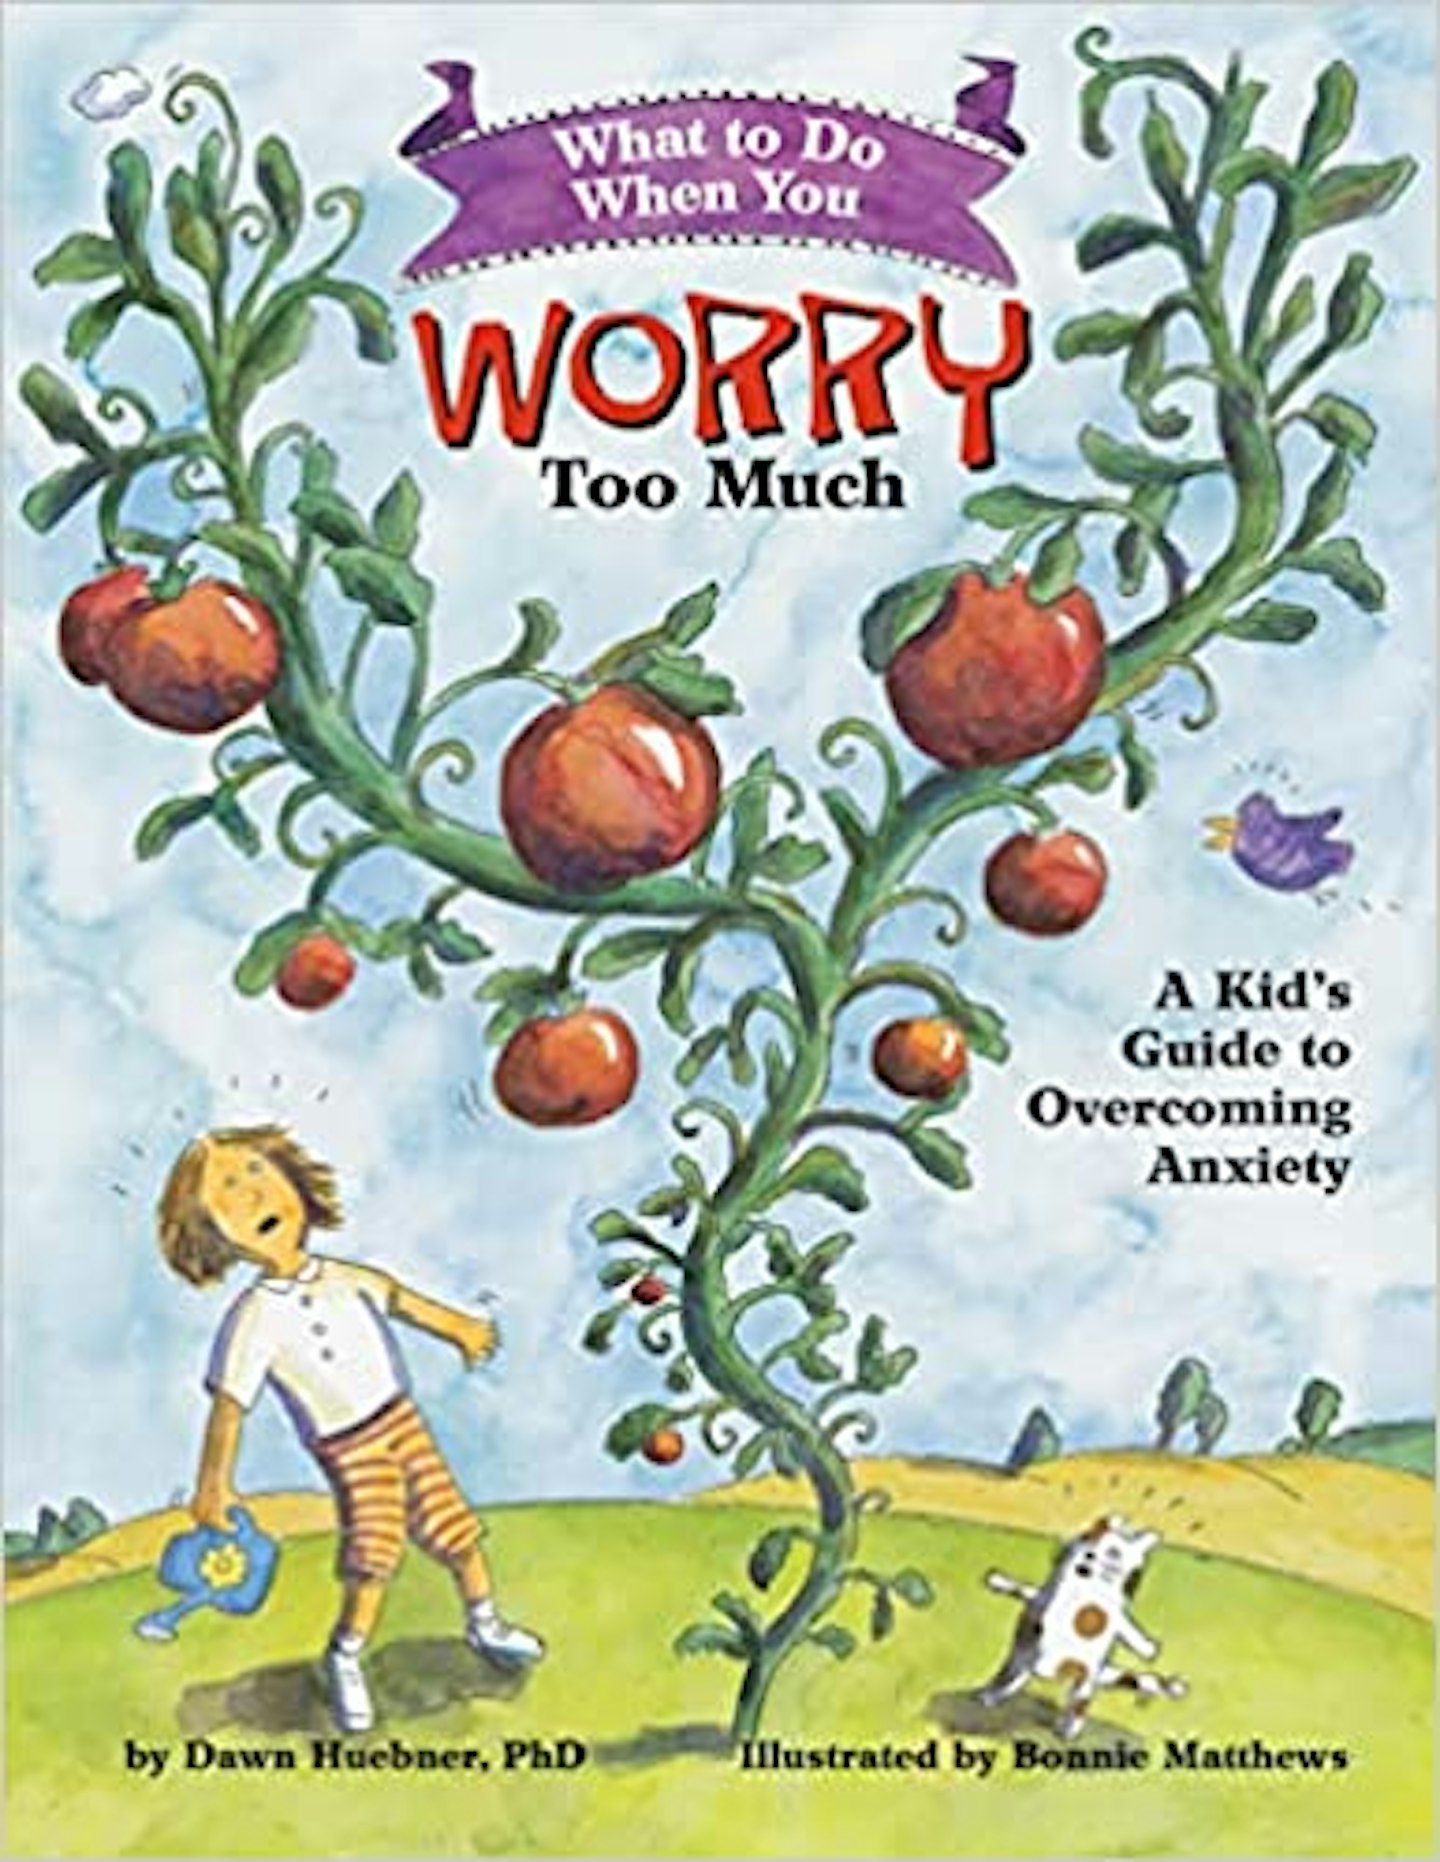 What to do When You Worry Too Much - Dawn Huebner and  Bonnie Matthews